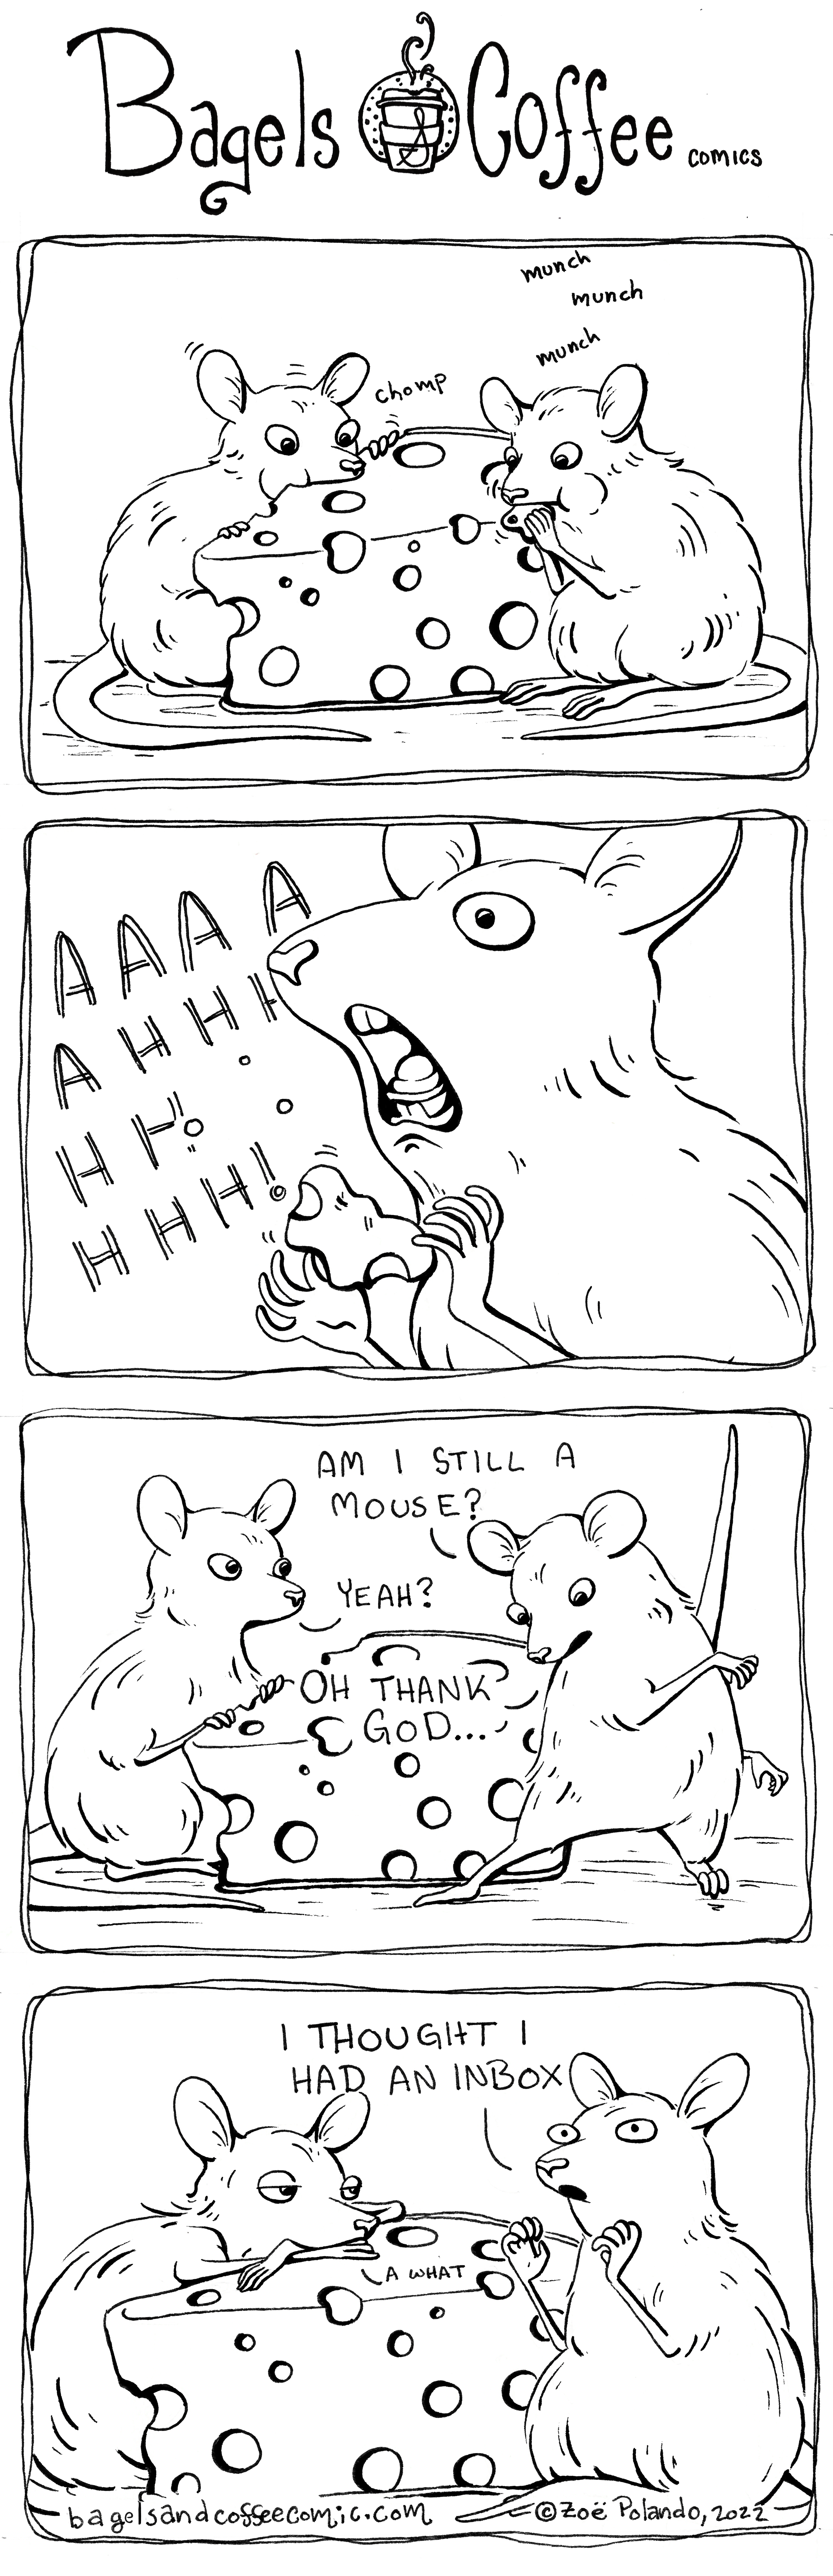 Four panels of two mouses eating a triangle of cheese. 
In the first the two mouses are chomping happily on some cheese. In the second panel one of the mice screams and drops their cheese tidbit. their face is one of pure terror. In the third panel the mouse checks itself and asks, "Am I still a mouse?" The second one replies, "Yeah" The first mouse says, "Oh thank god." In the final panel the first mouse says "I thought I had an inbox" The second mouse, leaning on the cheese, says "a what?" with an unimpressed look on its face. 